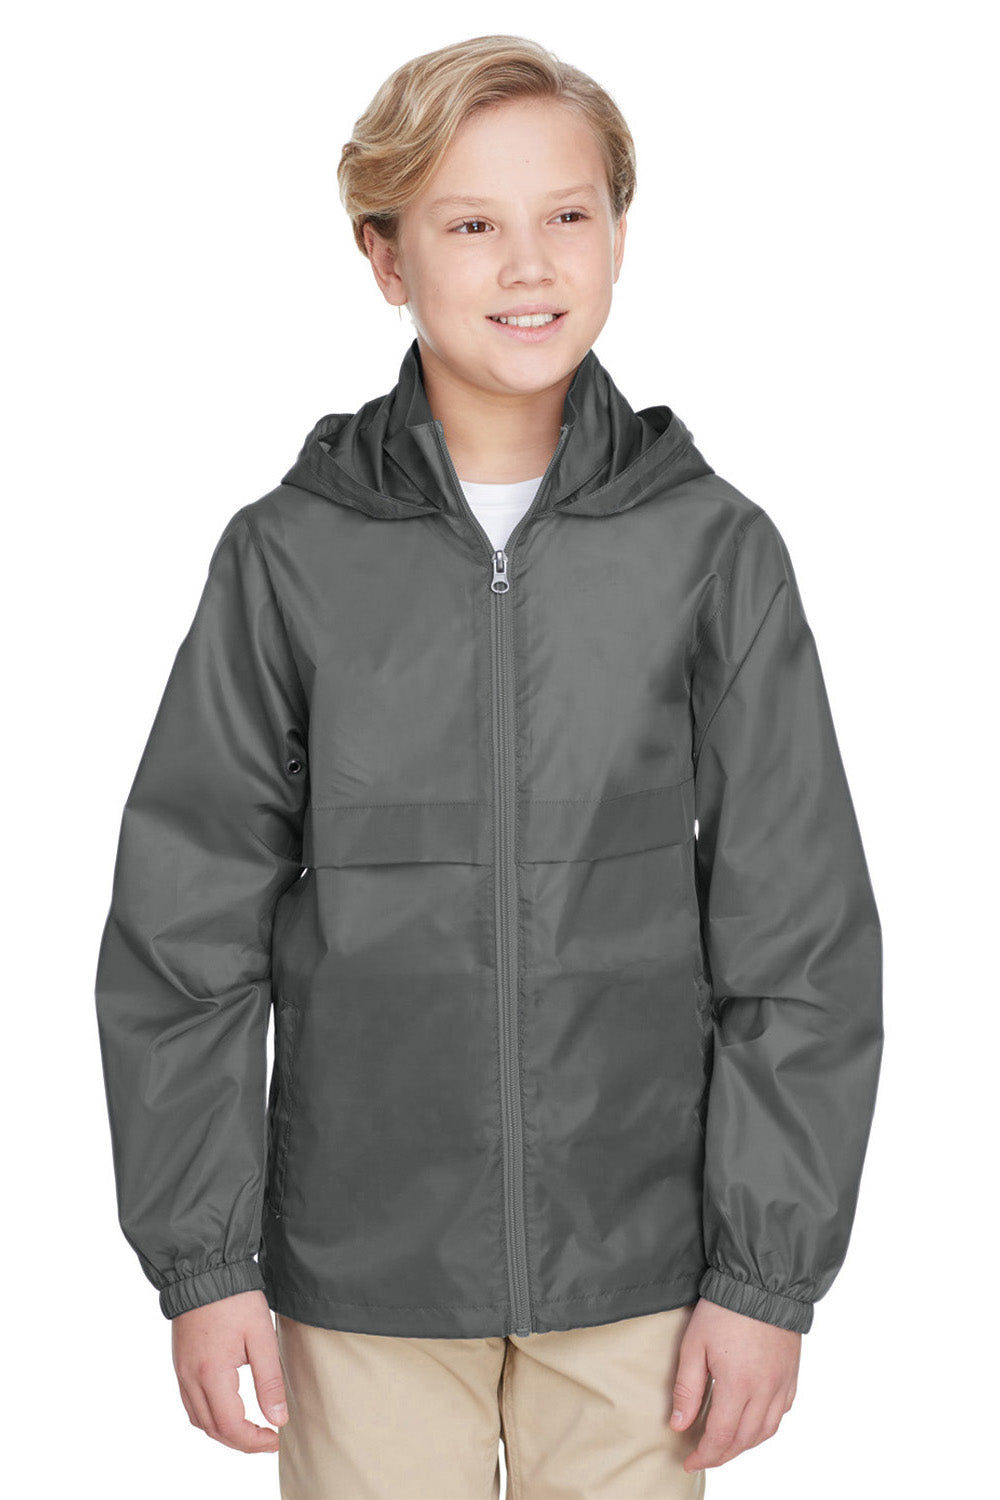 Team 365 TT73Y Youth Zone Protect Water Resistant Full Zip Hooded Jacket Graphite Grey Front